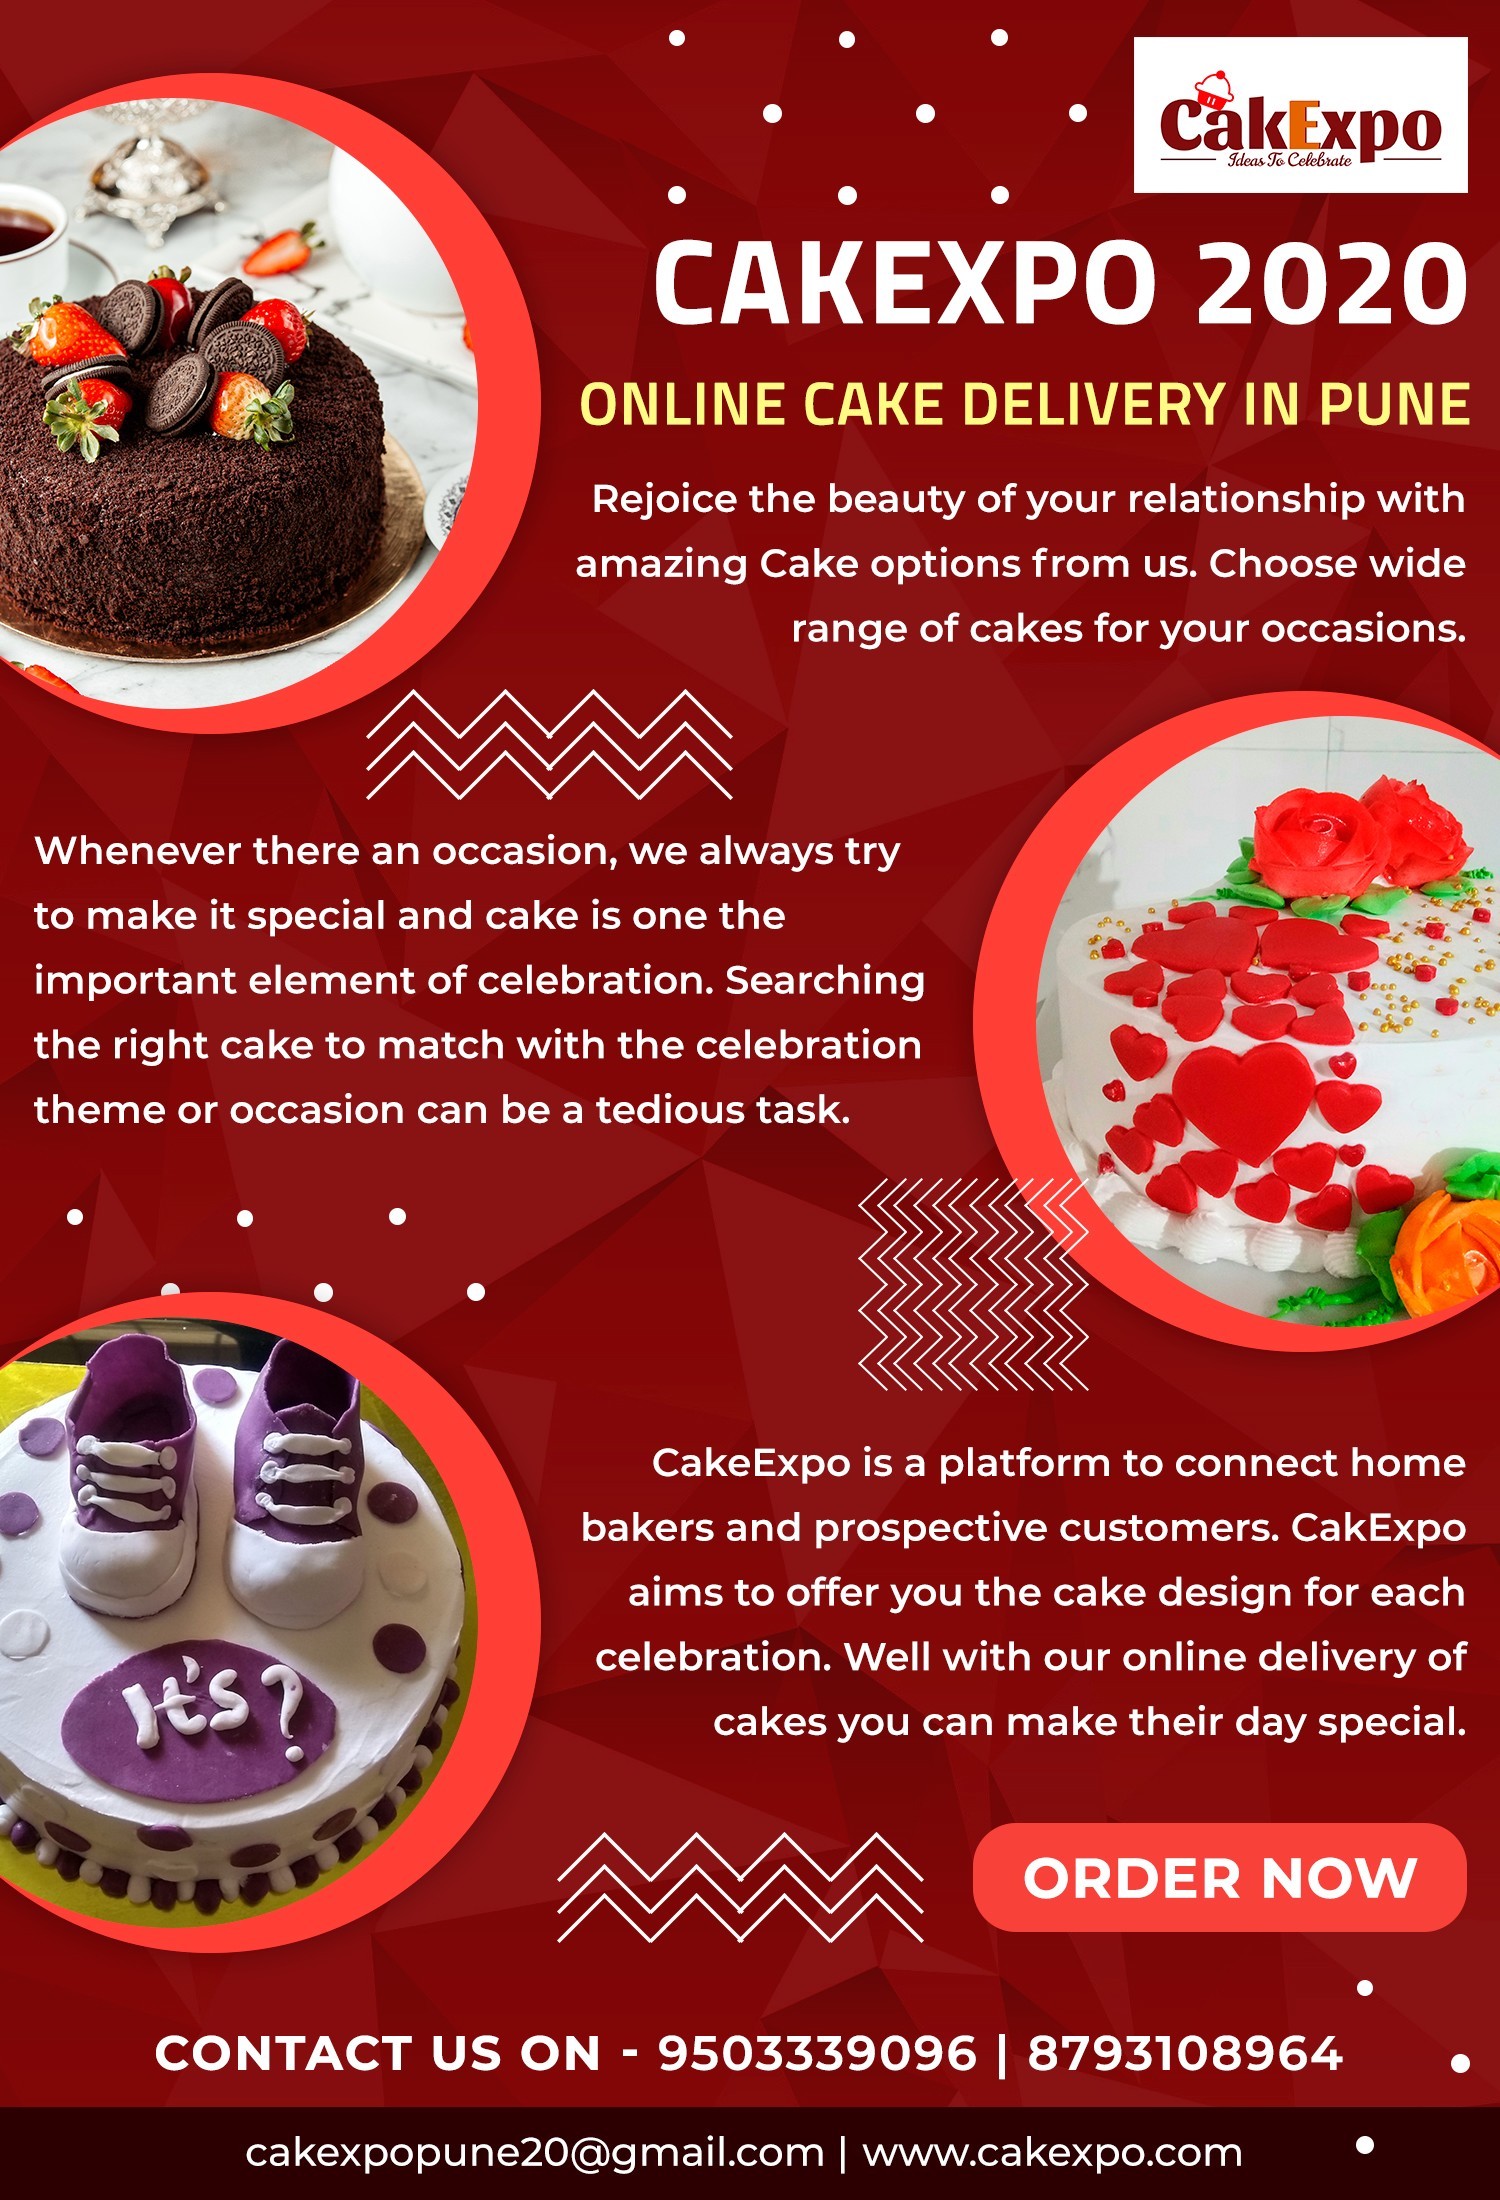 Online cake delivery in Pune